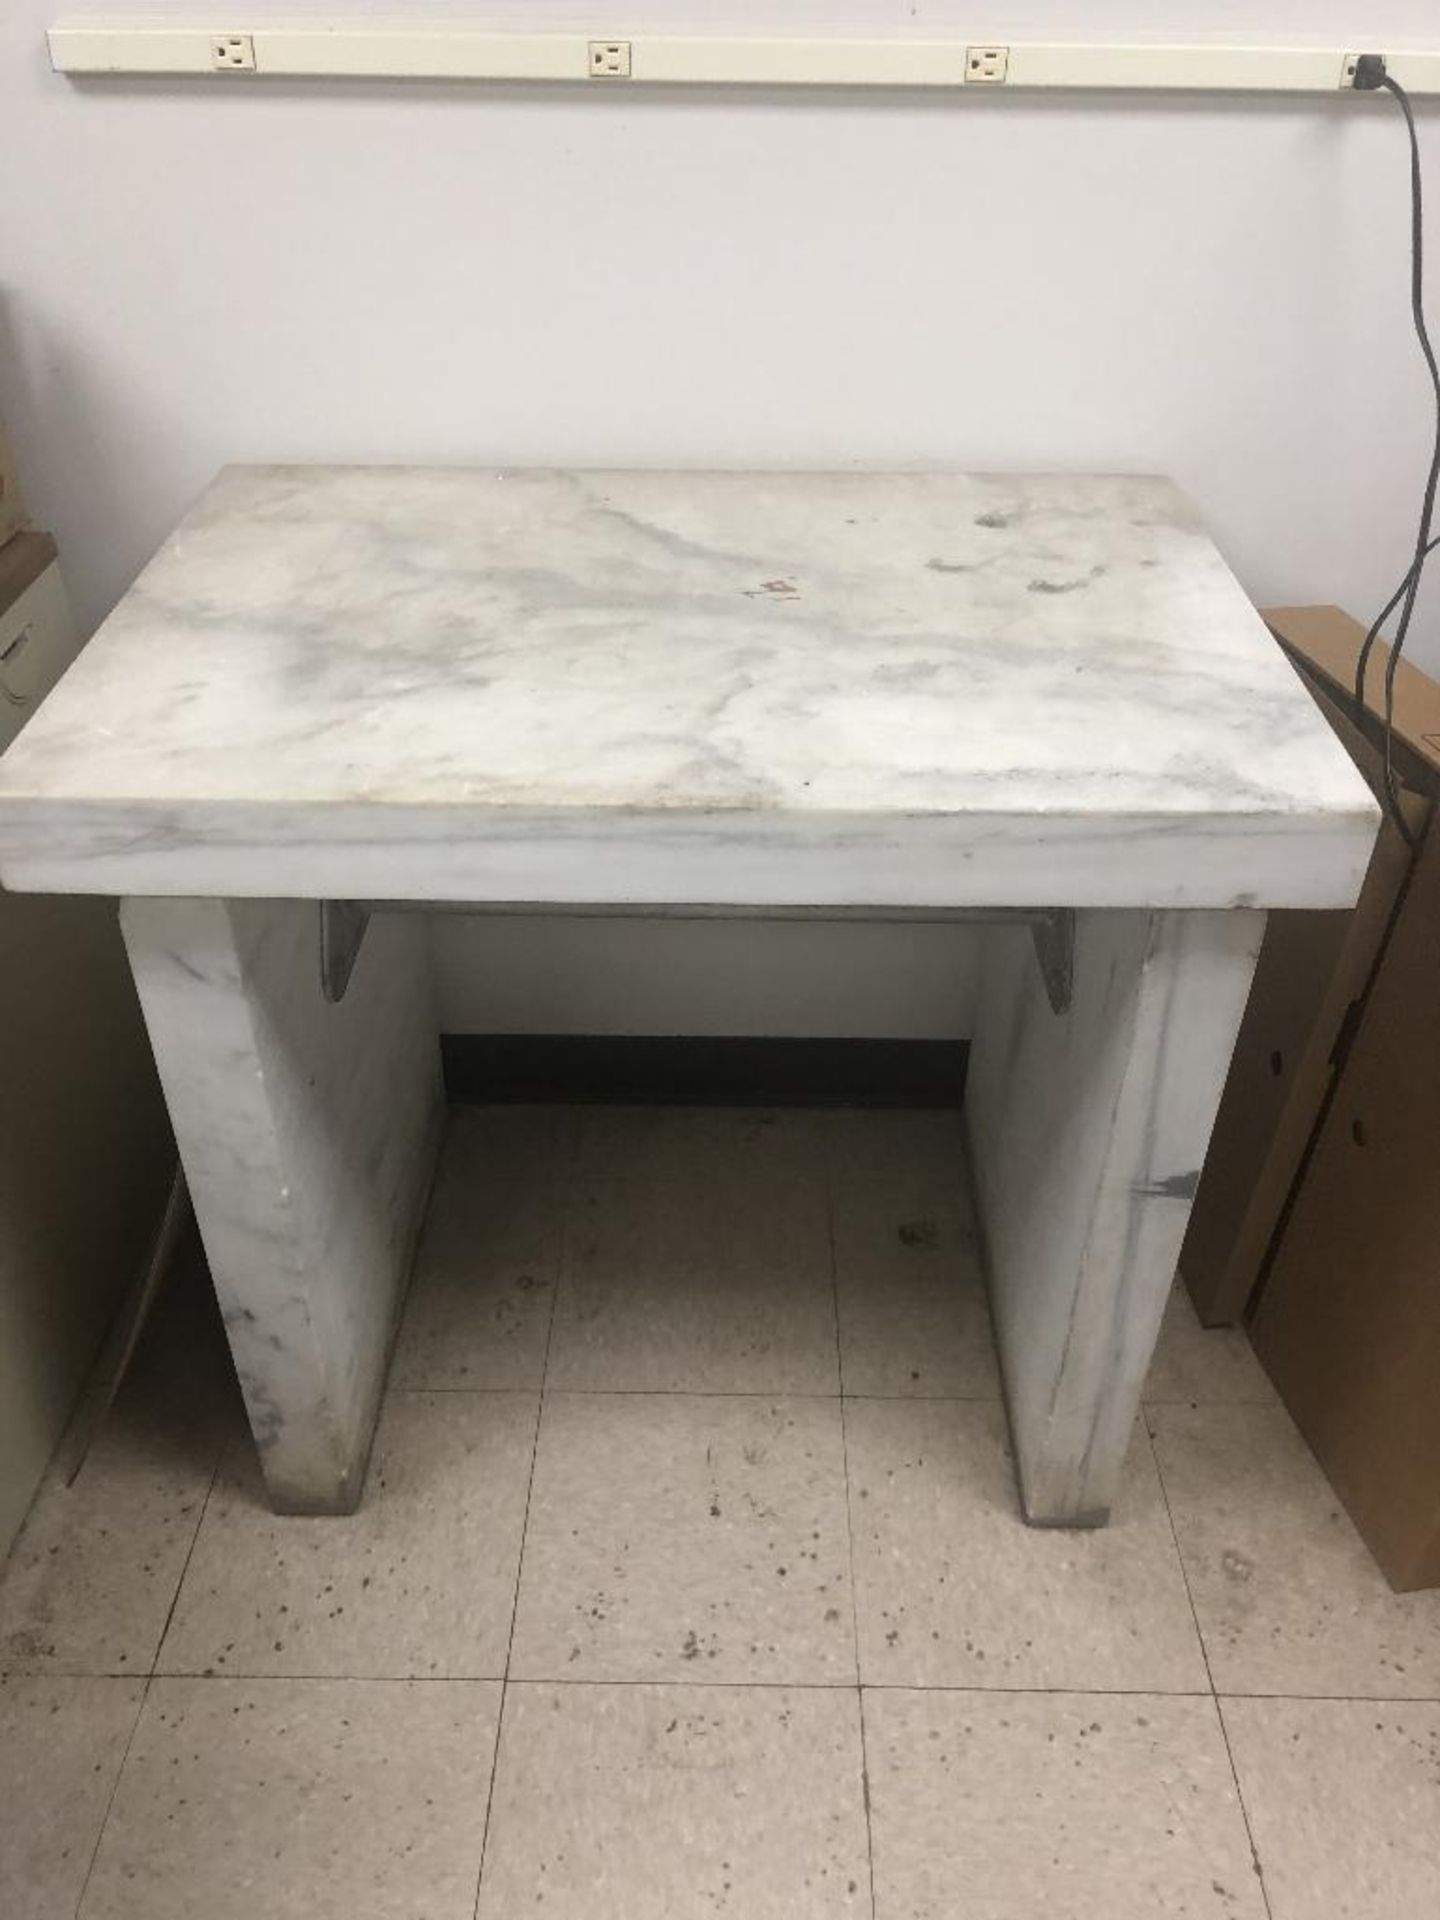 1 Marble Lab Table Dimensions 24" x 35" x 32"